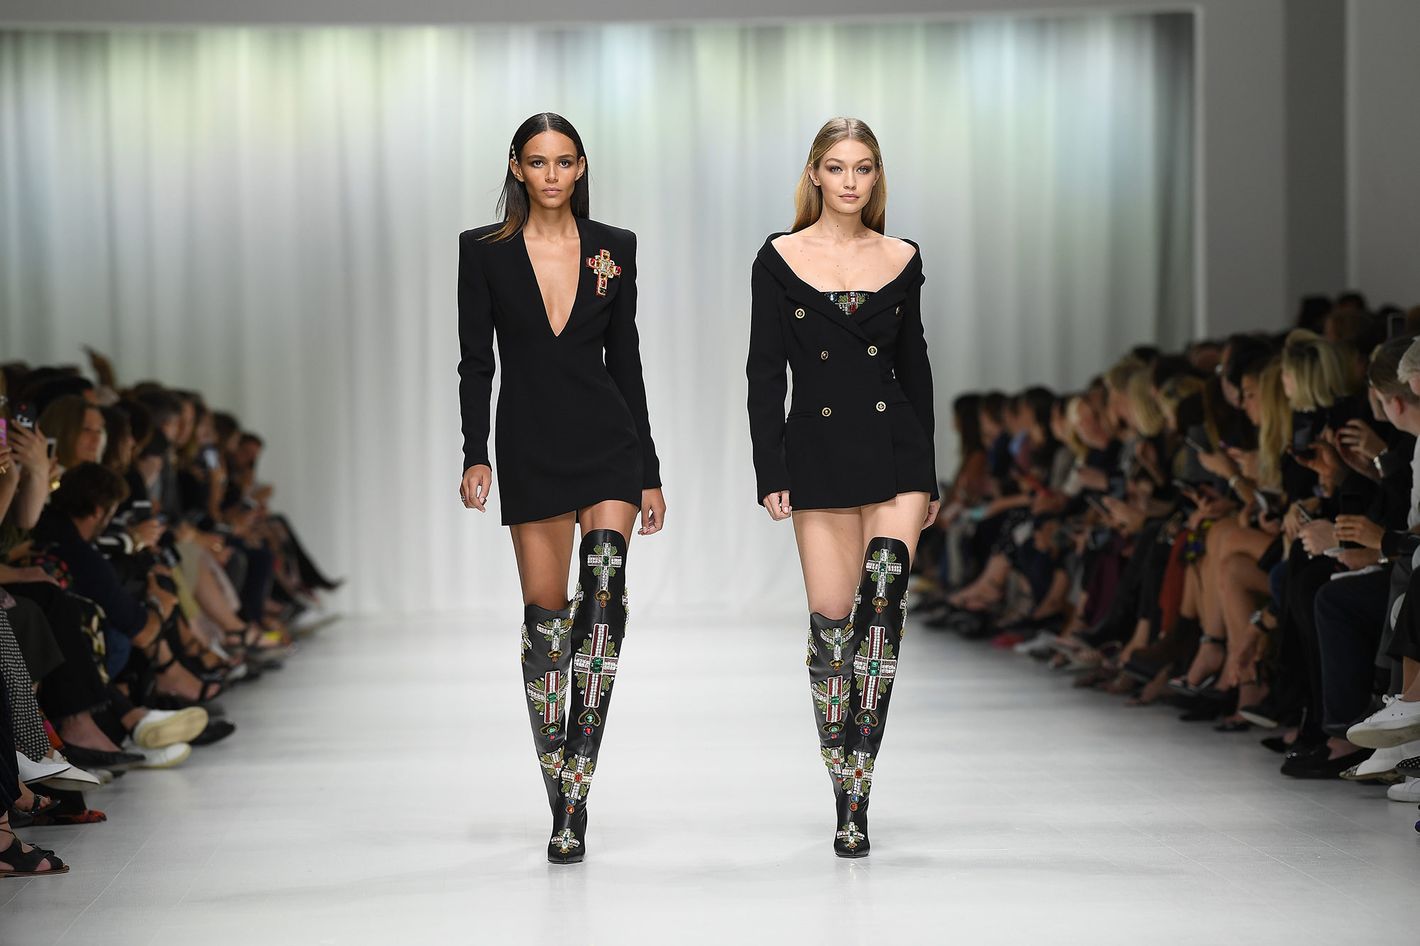 At Versace Spring 2018, The Original Supermodels Walked the Runway Together  Once Again